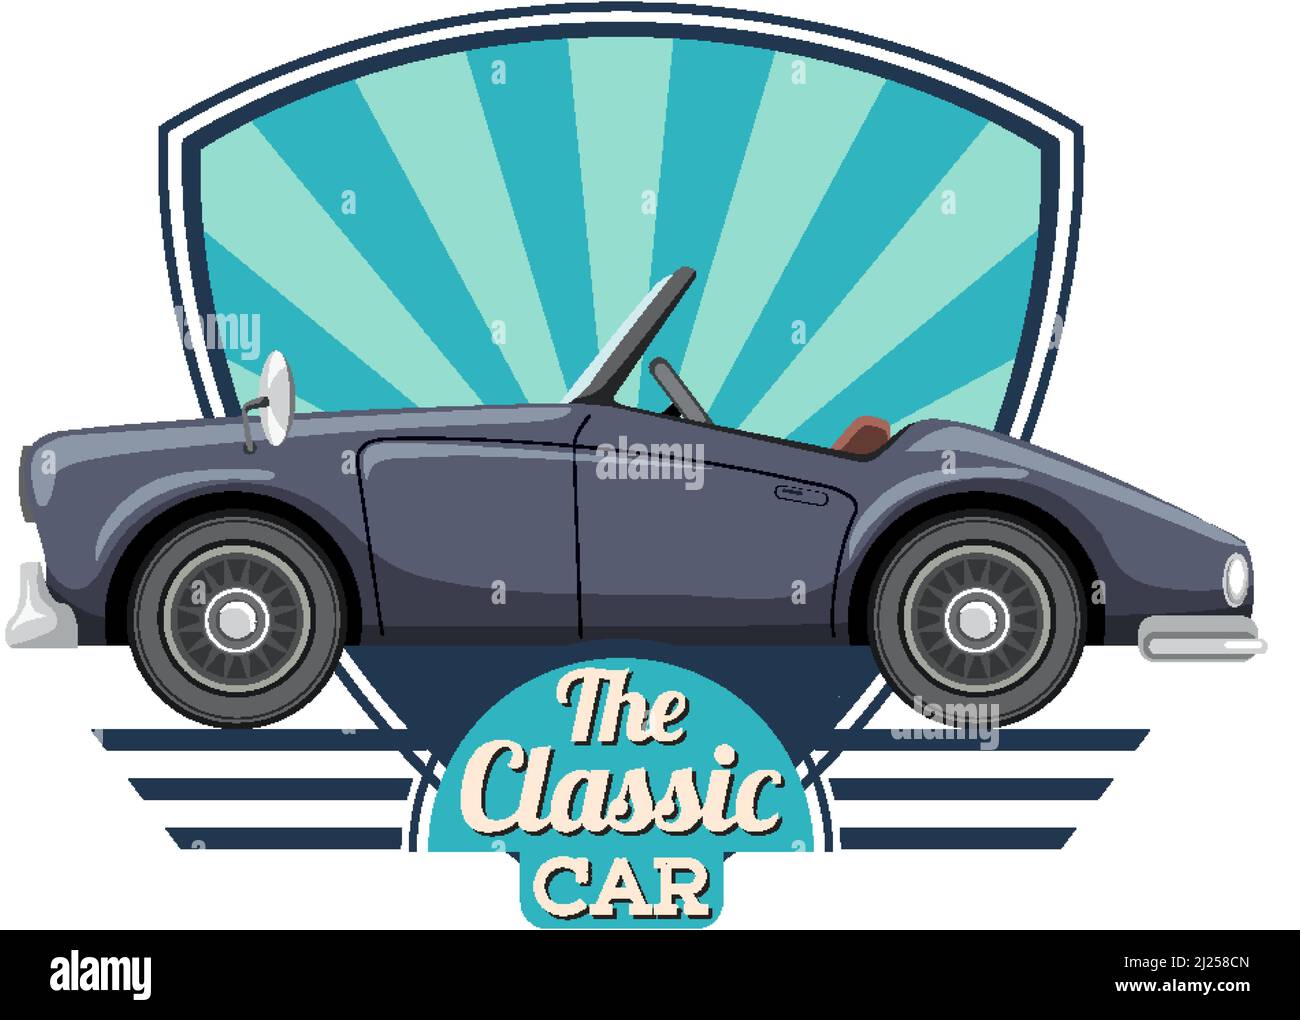 Classic car concept with old car side view illustration Stock Vector ...